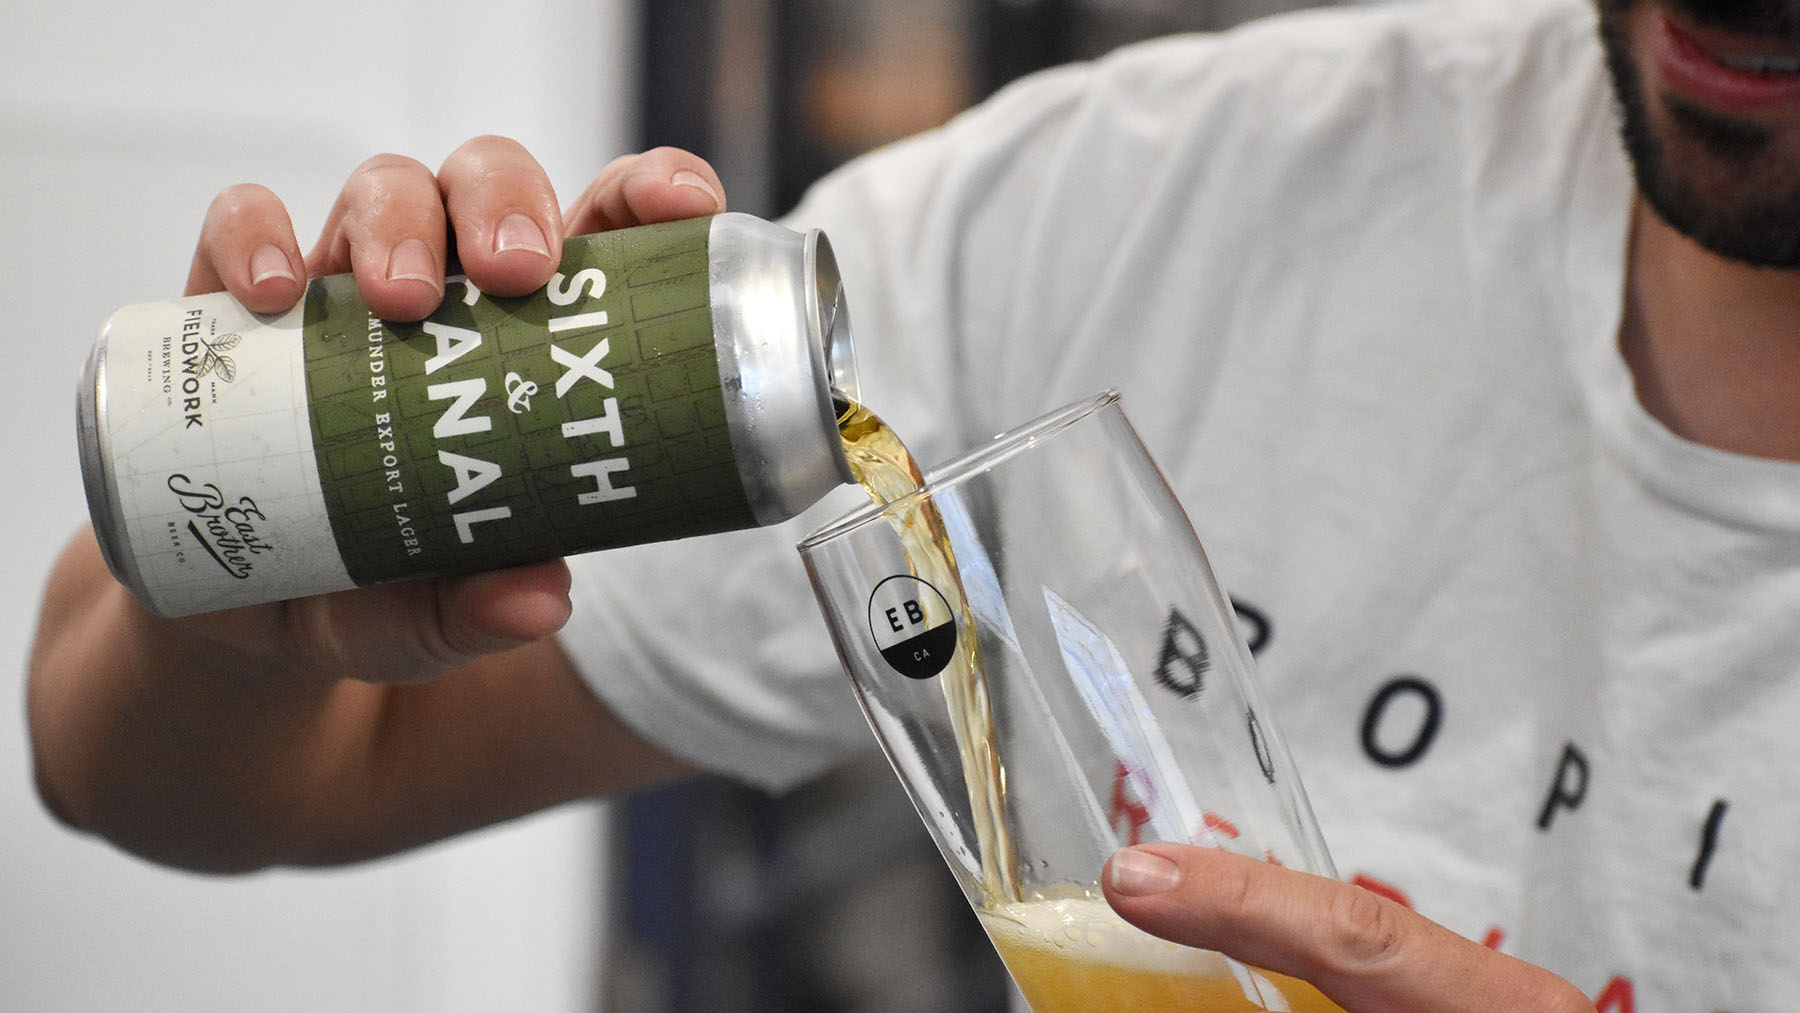 Man pours beer into a glass from a can; the beer label reads "Sixth & Canal."